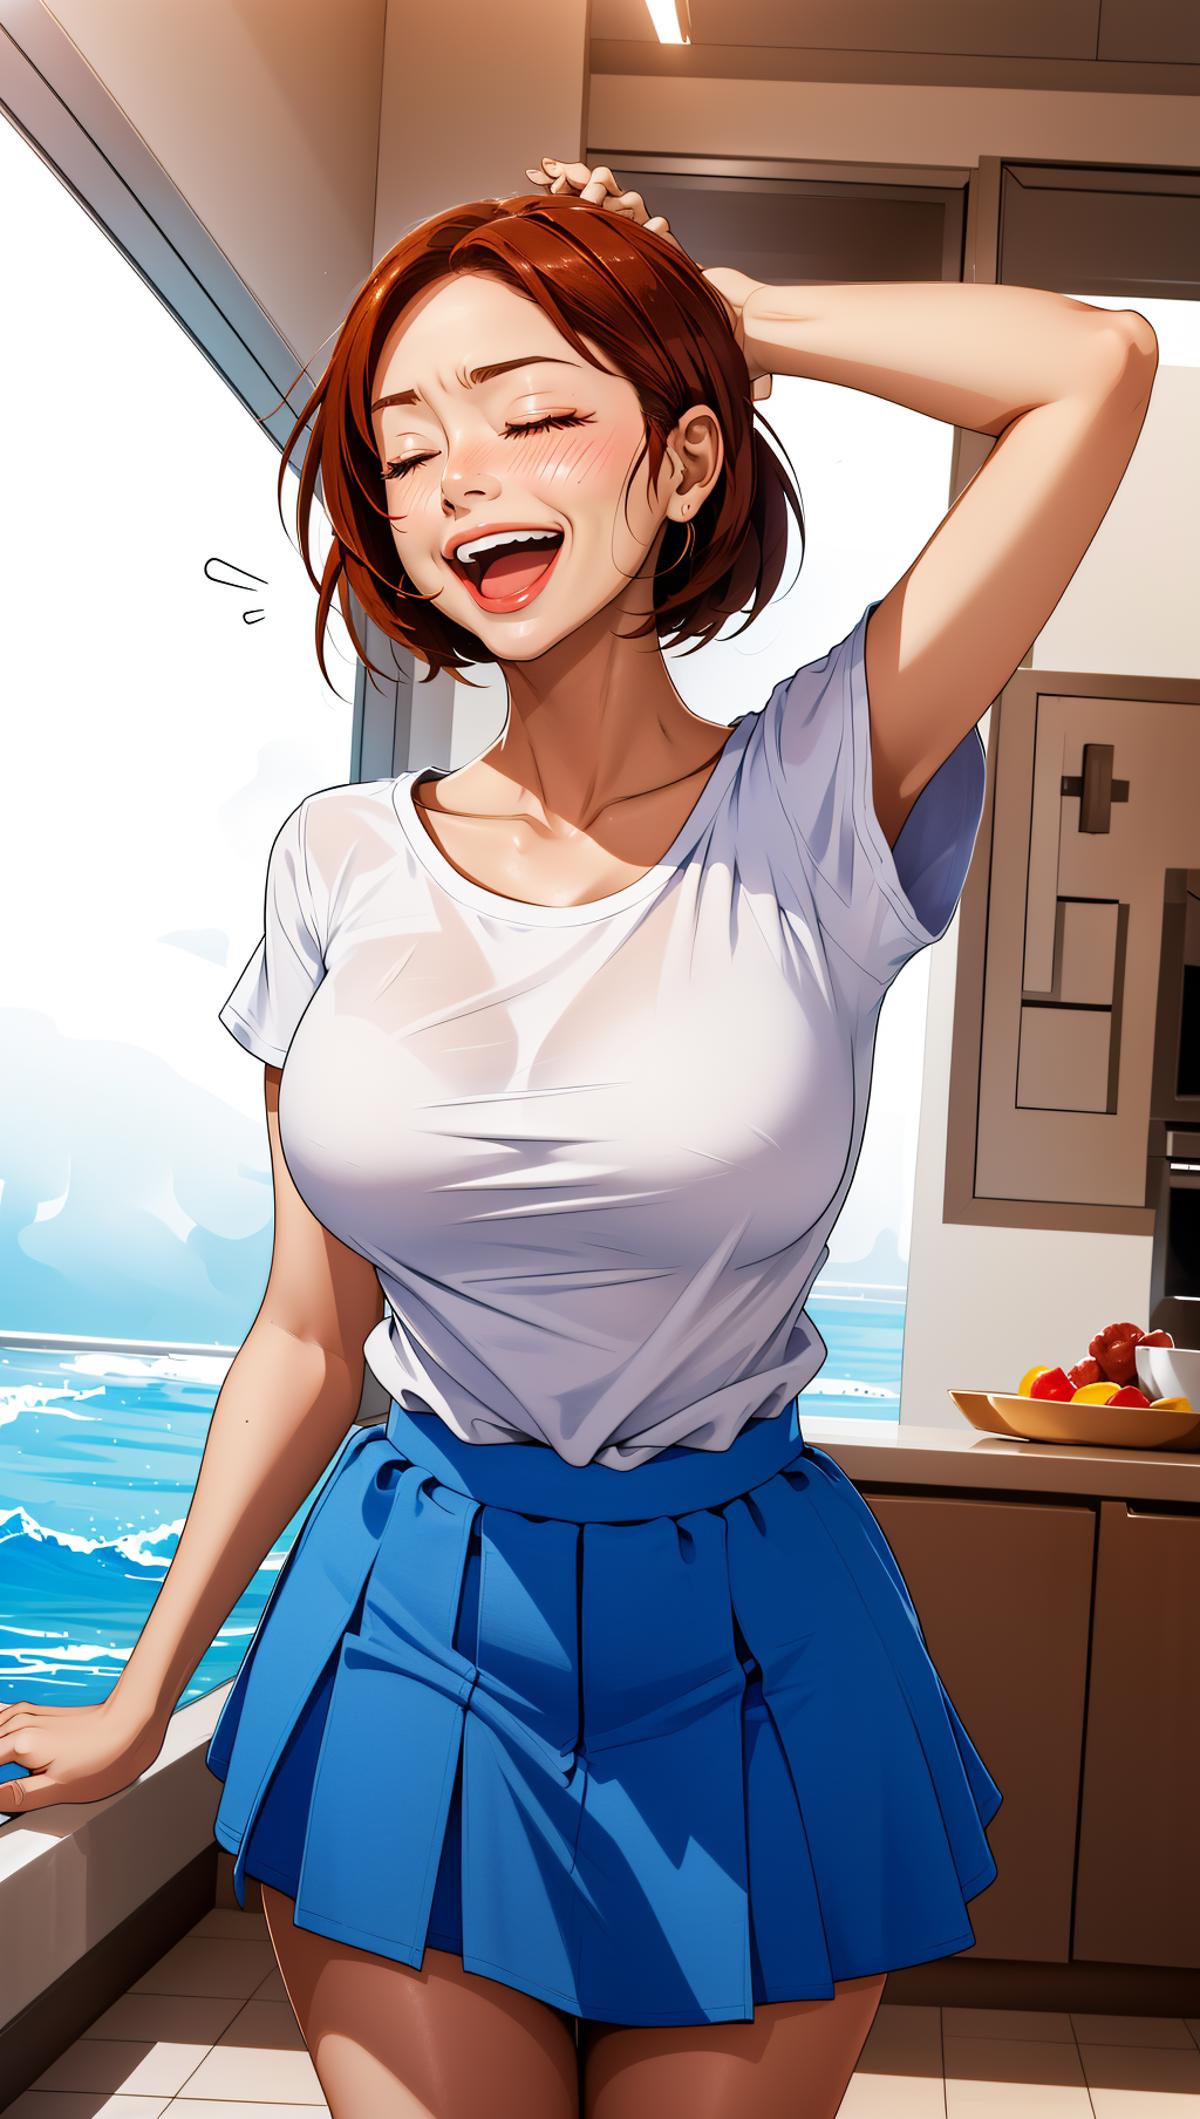 A cartoon drawing of a woman wearing a white shirt and blue shorts, laughing and smiling.